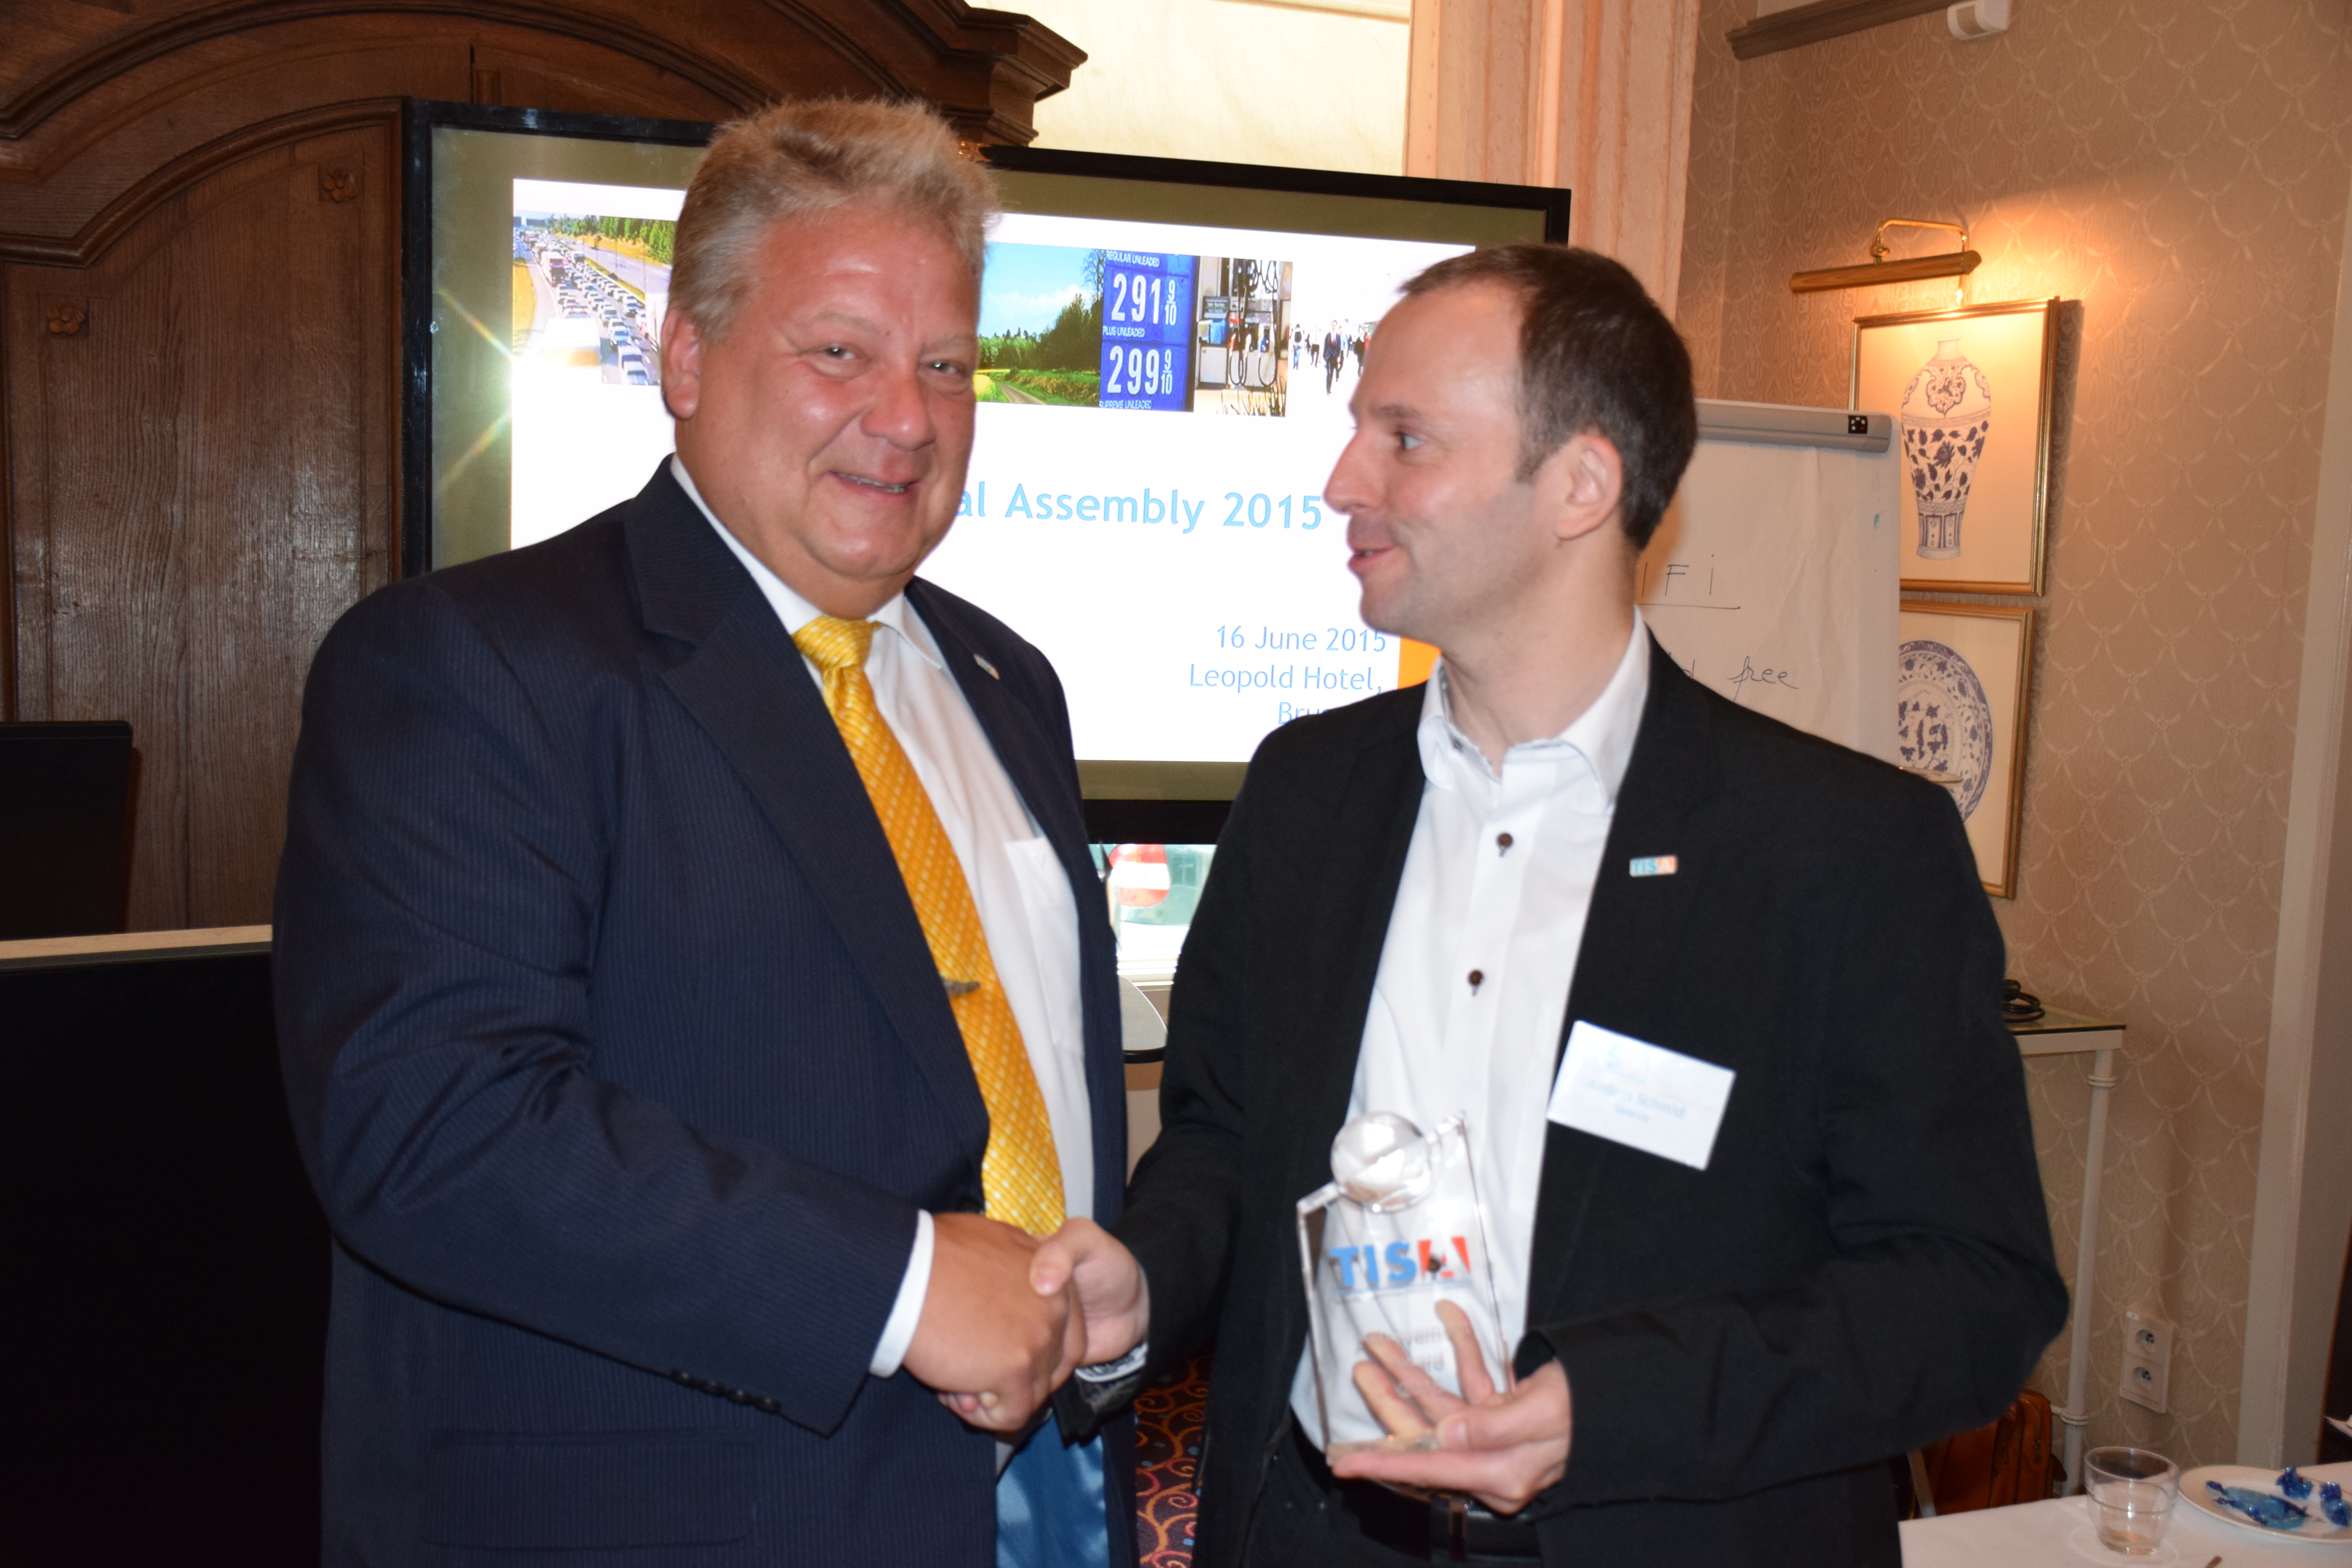 Andreas Schmid received the TISA Achievement Award